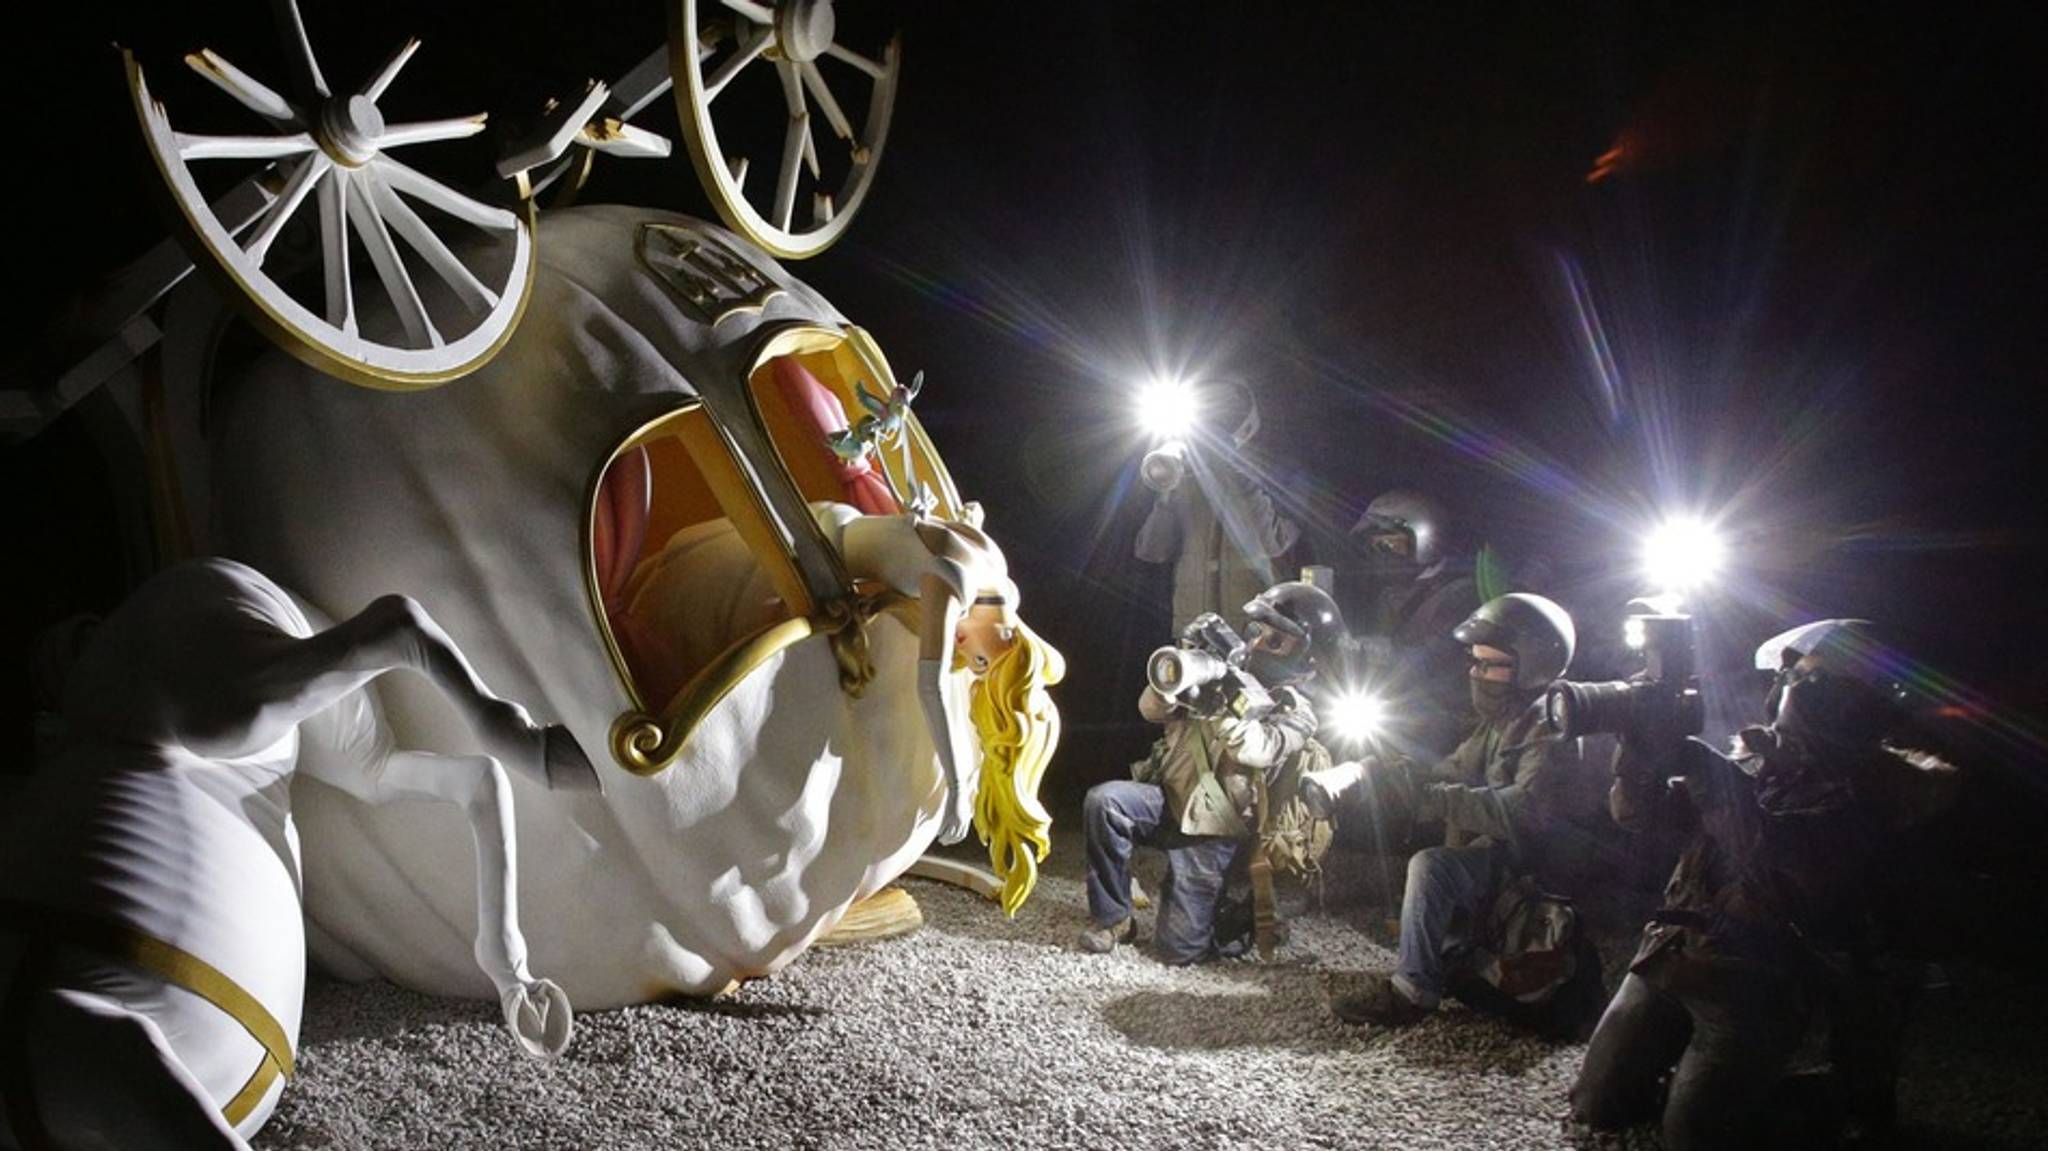 Banksy’s Dismaland is a theme park for art